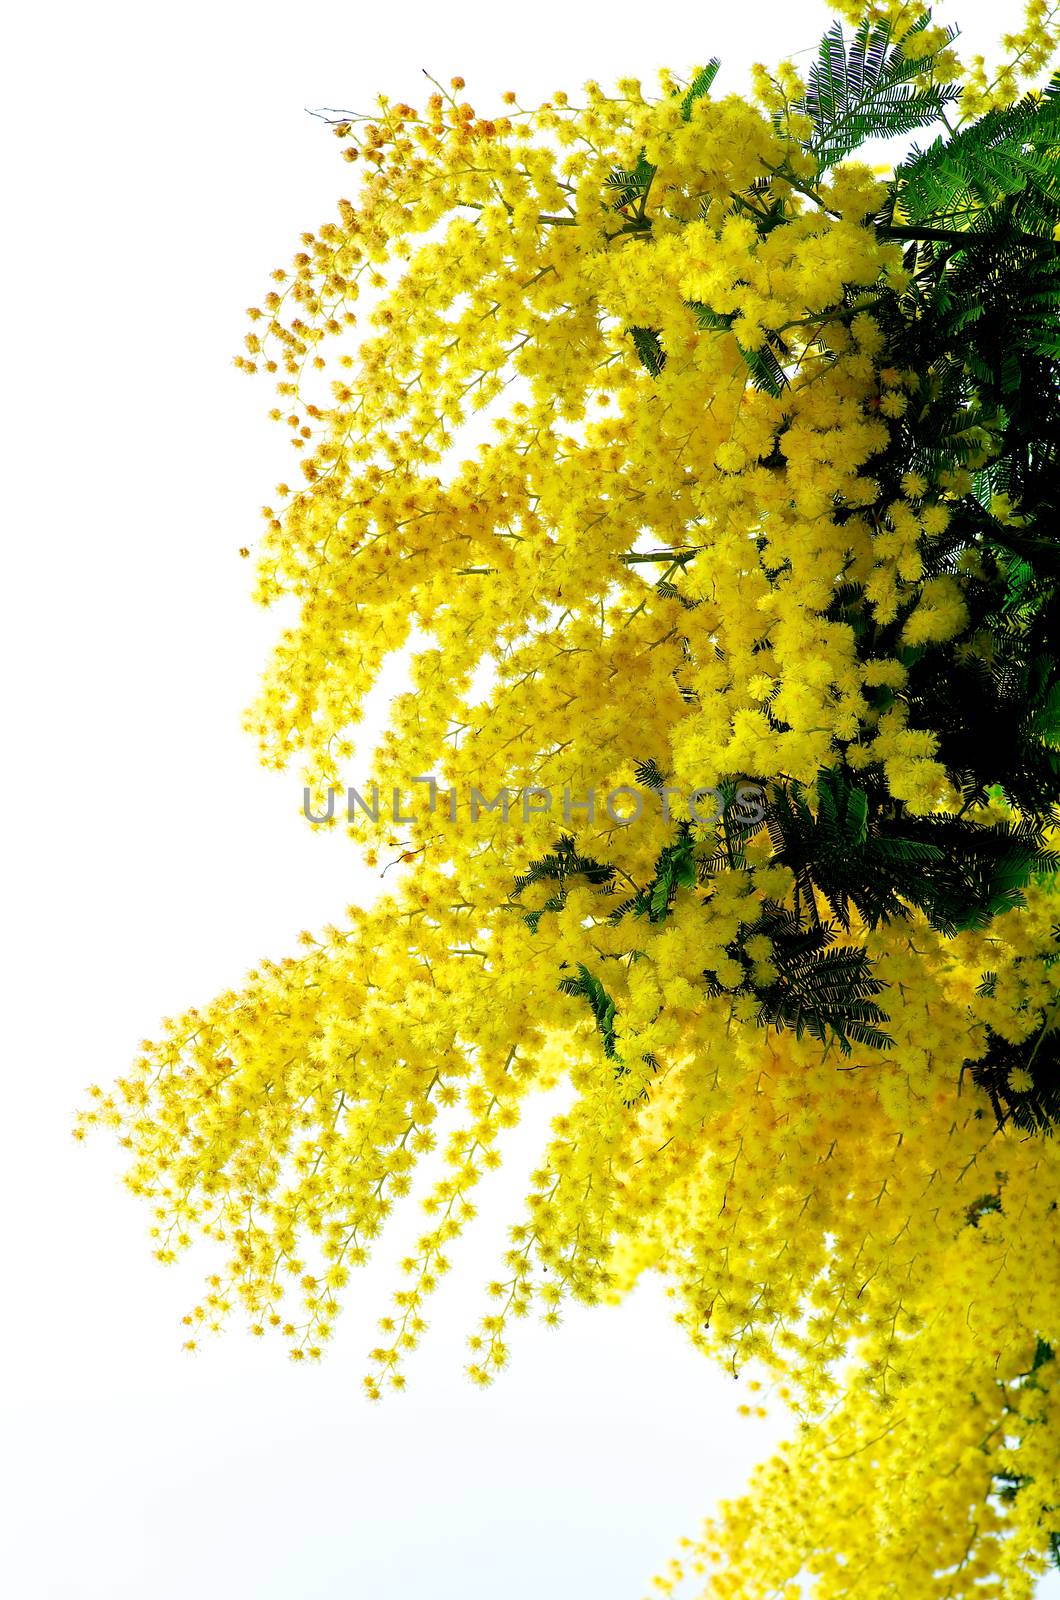 Beauty Yellow Lush Foliage Flowering Mimosa with Leafs isolated on White background